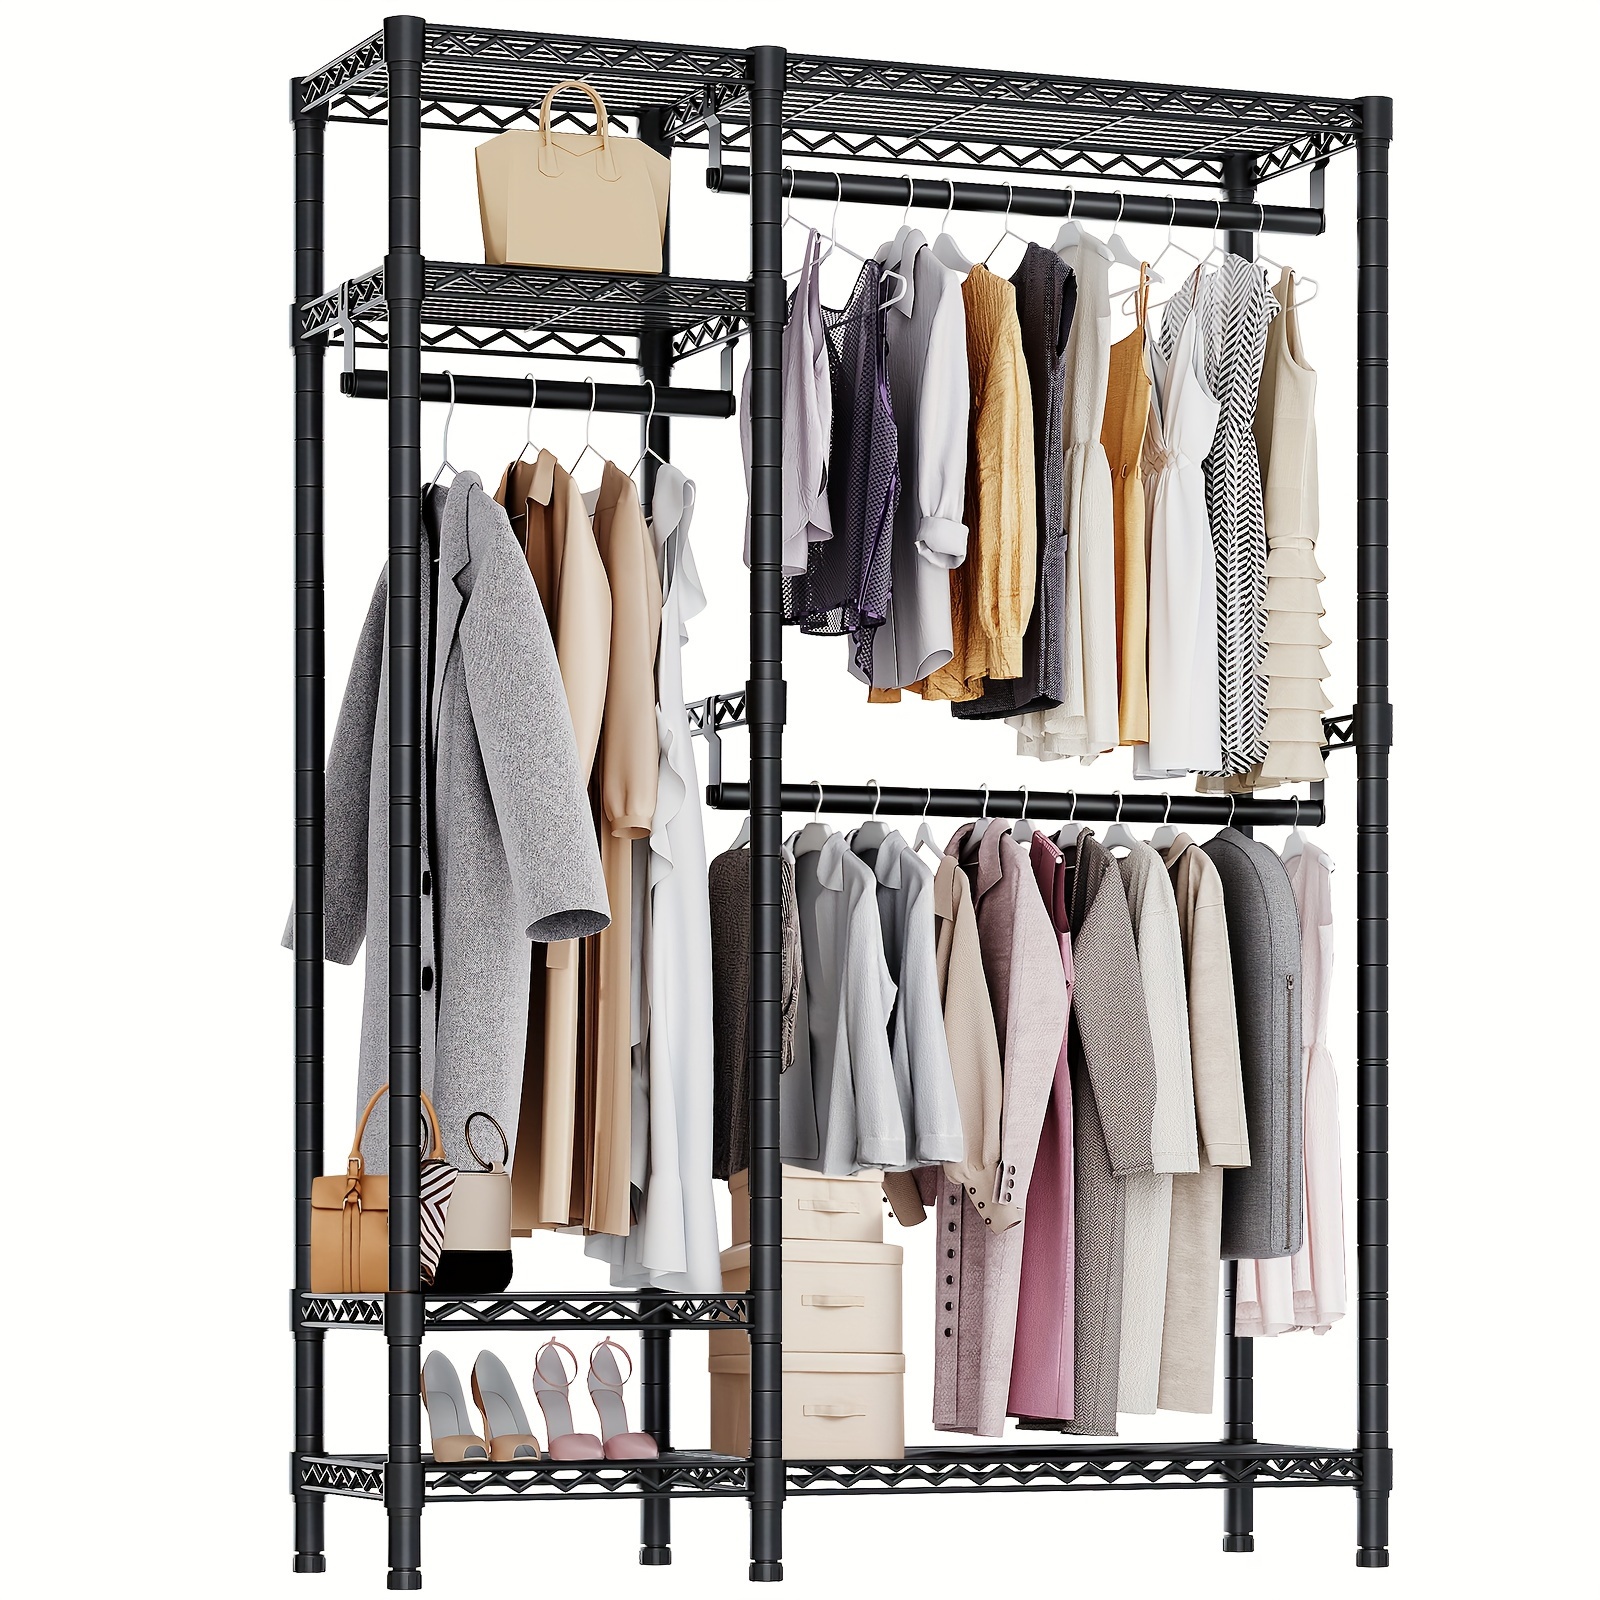 

Garment Rack, Heavy Duty Clothing Rack With 4 Tiers Adjustable Shelves And 3 Hanging Rods, Freestanding Metal Clothes Rack, Black